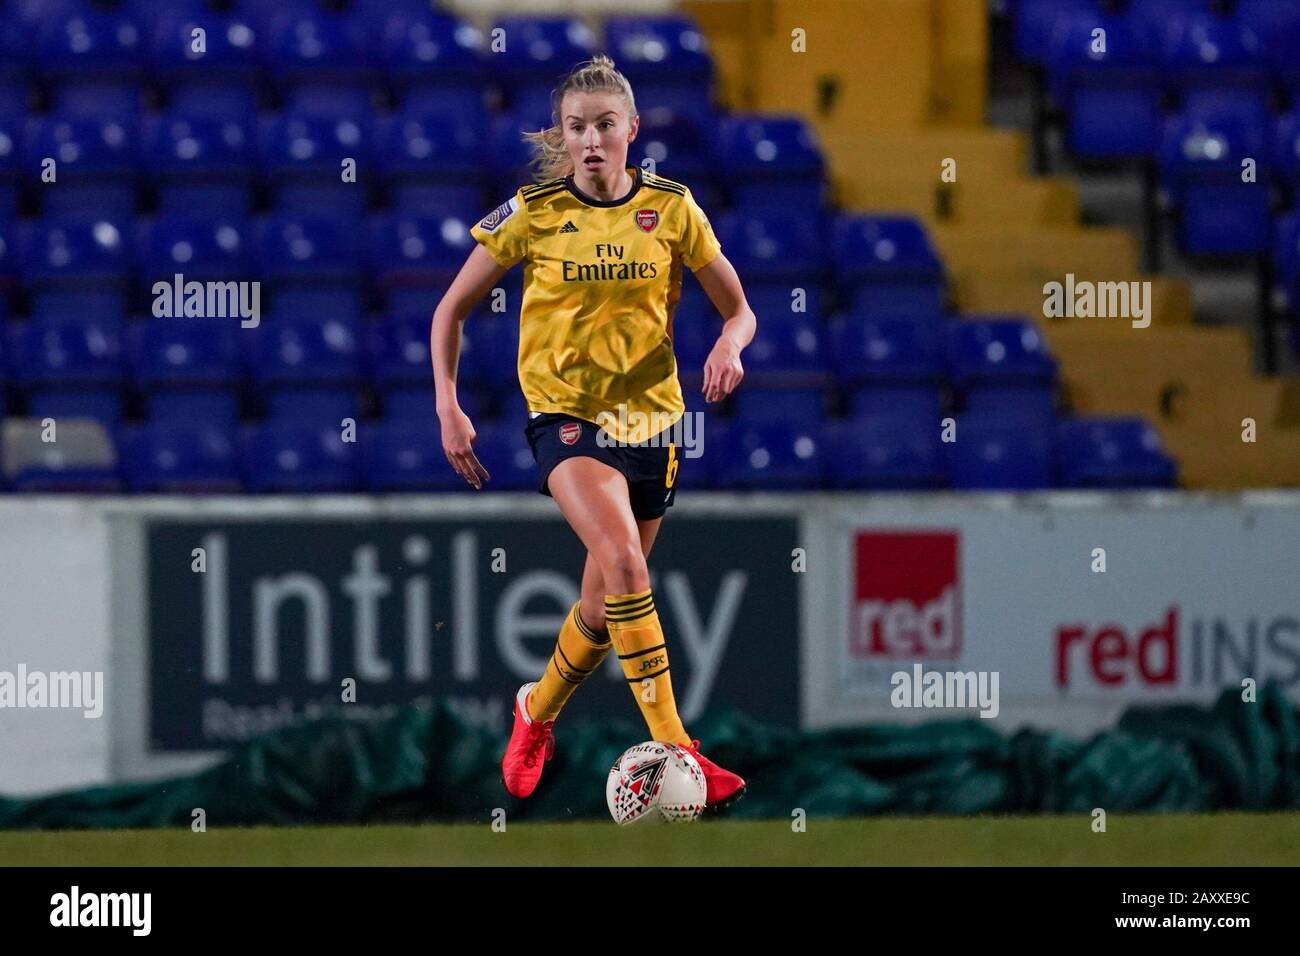 CHESTER. ENGLAND. FEB 13th: Leah Williamson of Arsenal in action  during the Women’s Super League game between Liverpool Women and Arsenal Women at The Deva Stadium in Chester, England. (Photo by Daniela Porcelli/SPP) Stock Photo